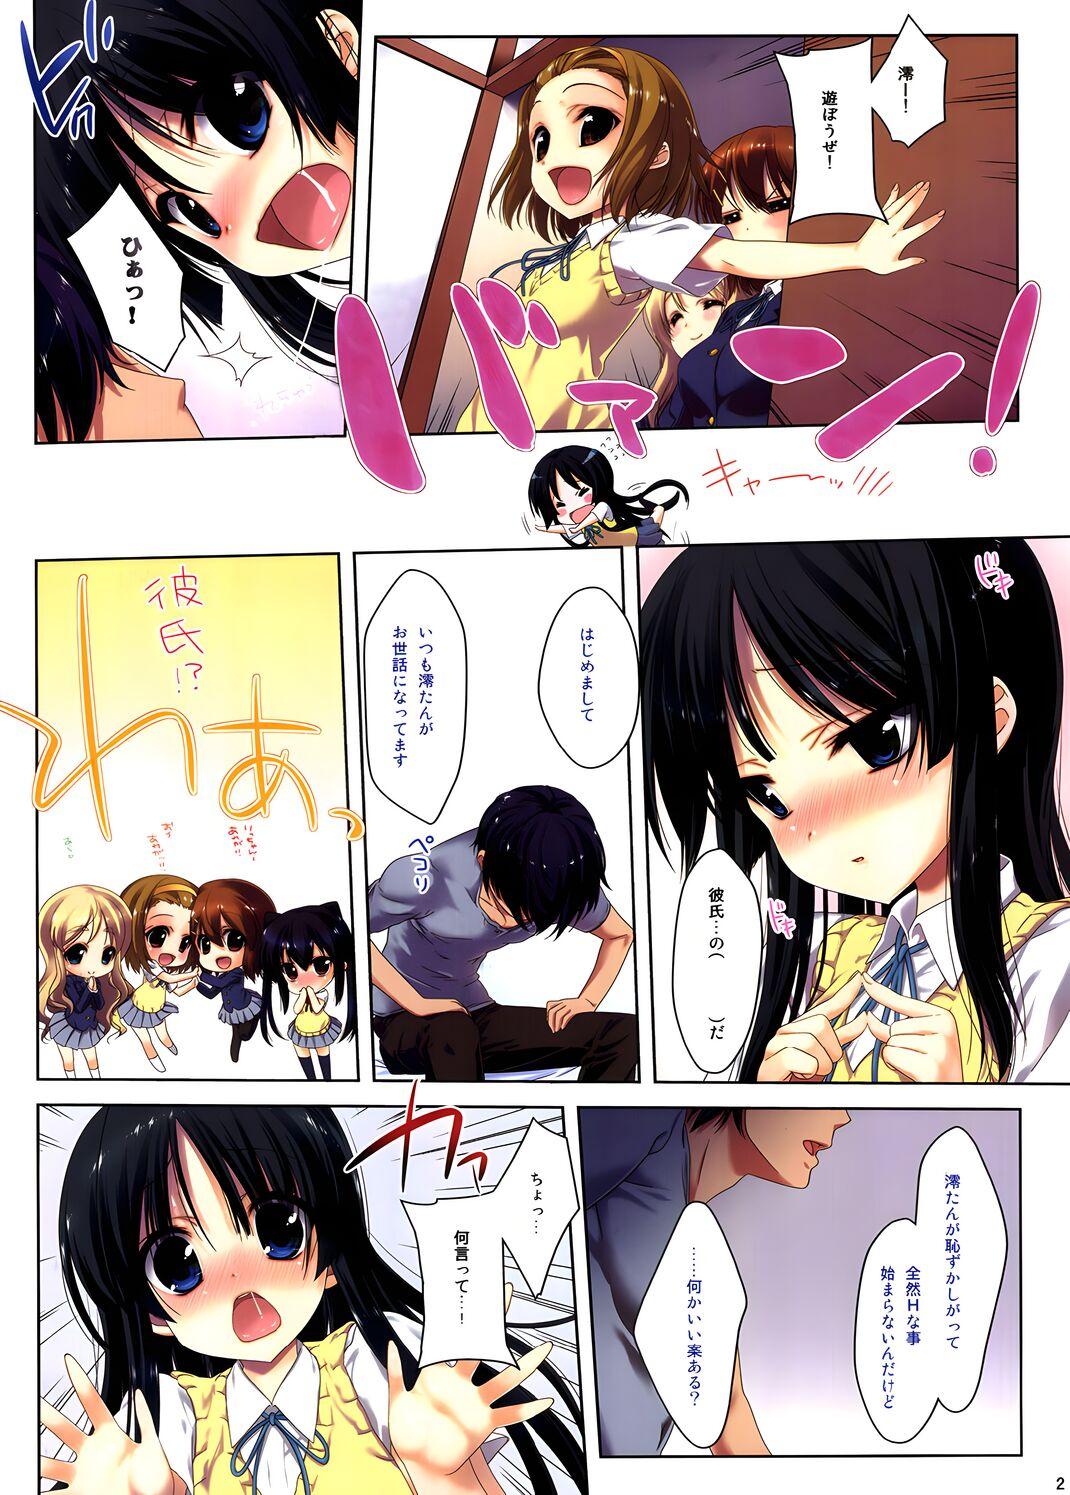 Mexicana Mio-tan! 4 Minnade color - K on Long Hair - Page 2